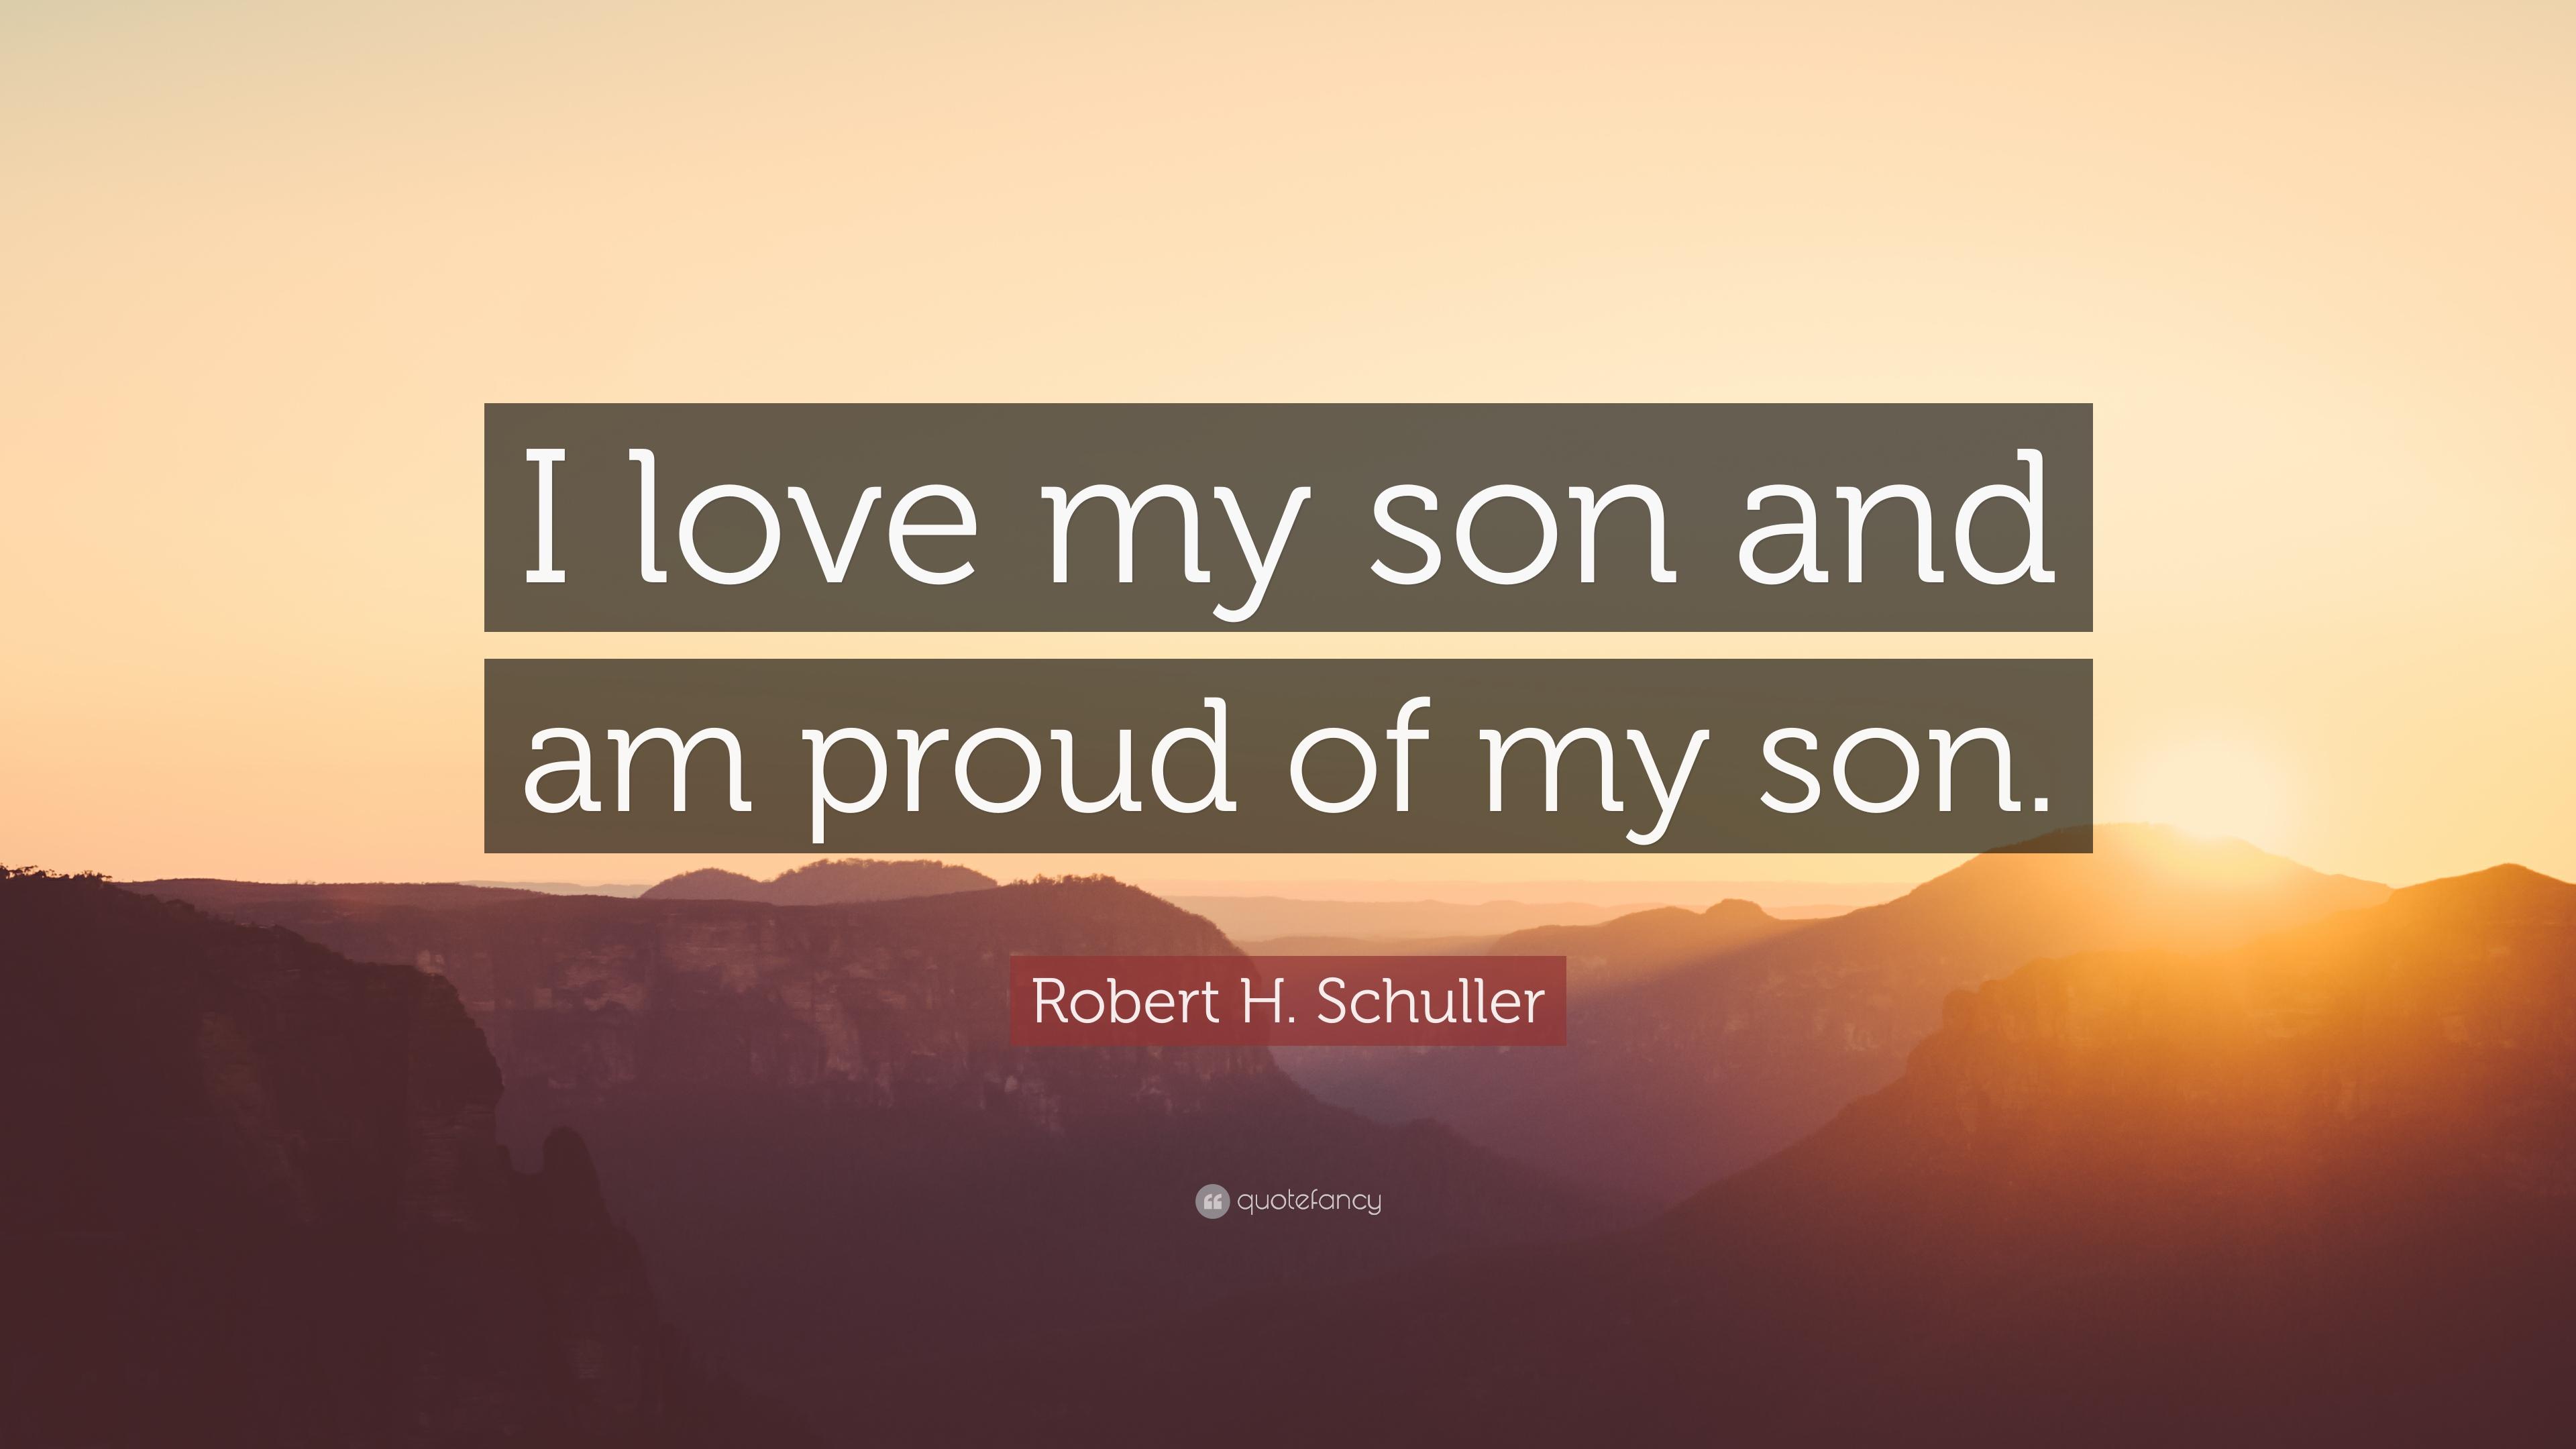 Robert H. Schuller Quote: “I love my son and am proud of my son